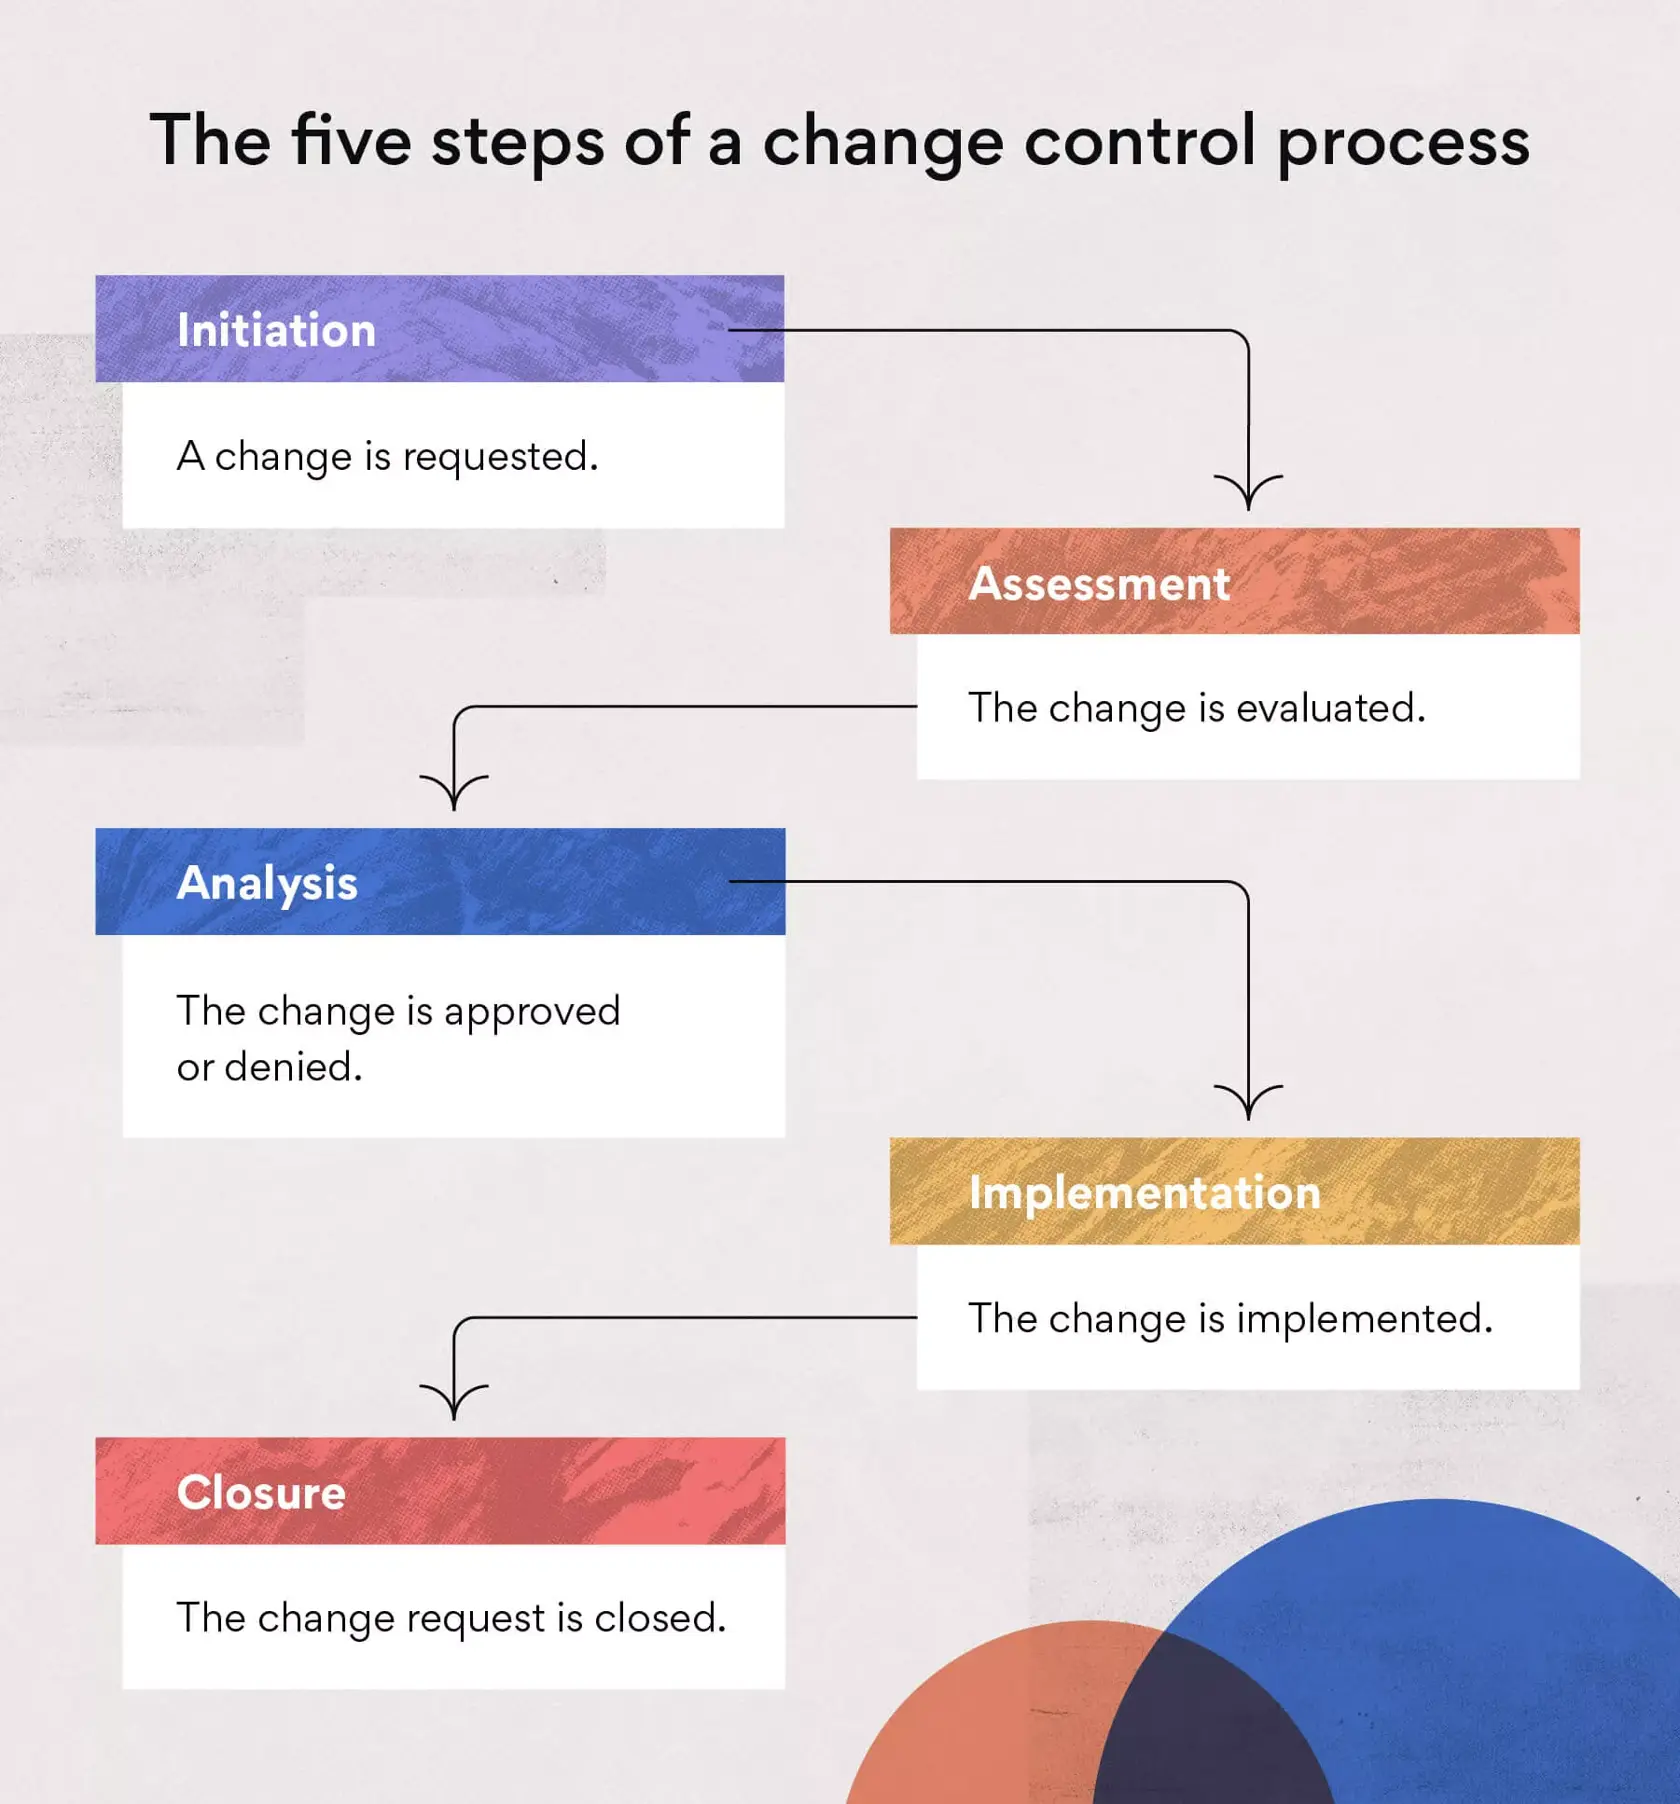 The five steps of a change control process